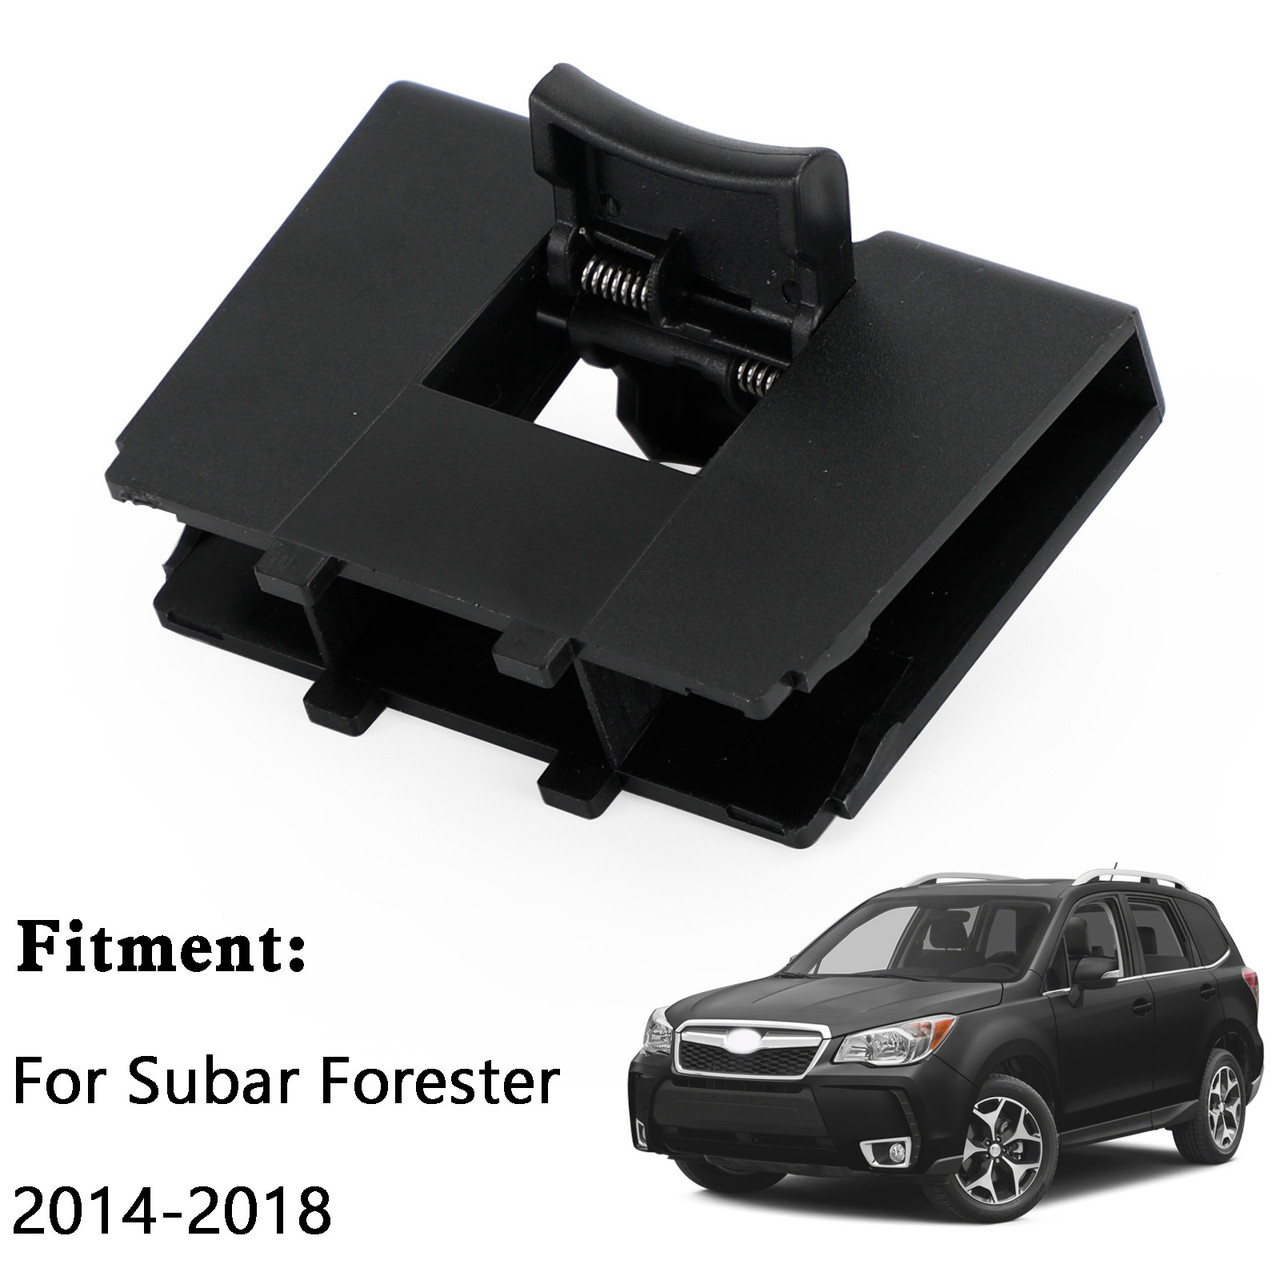 Cup Holder Barrier Partition 92118AJ001 For Subaru Forester 2014-2018